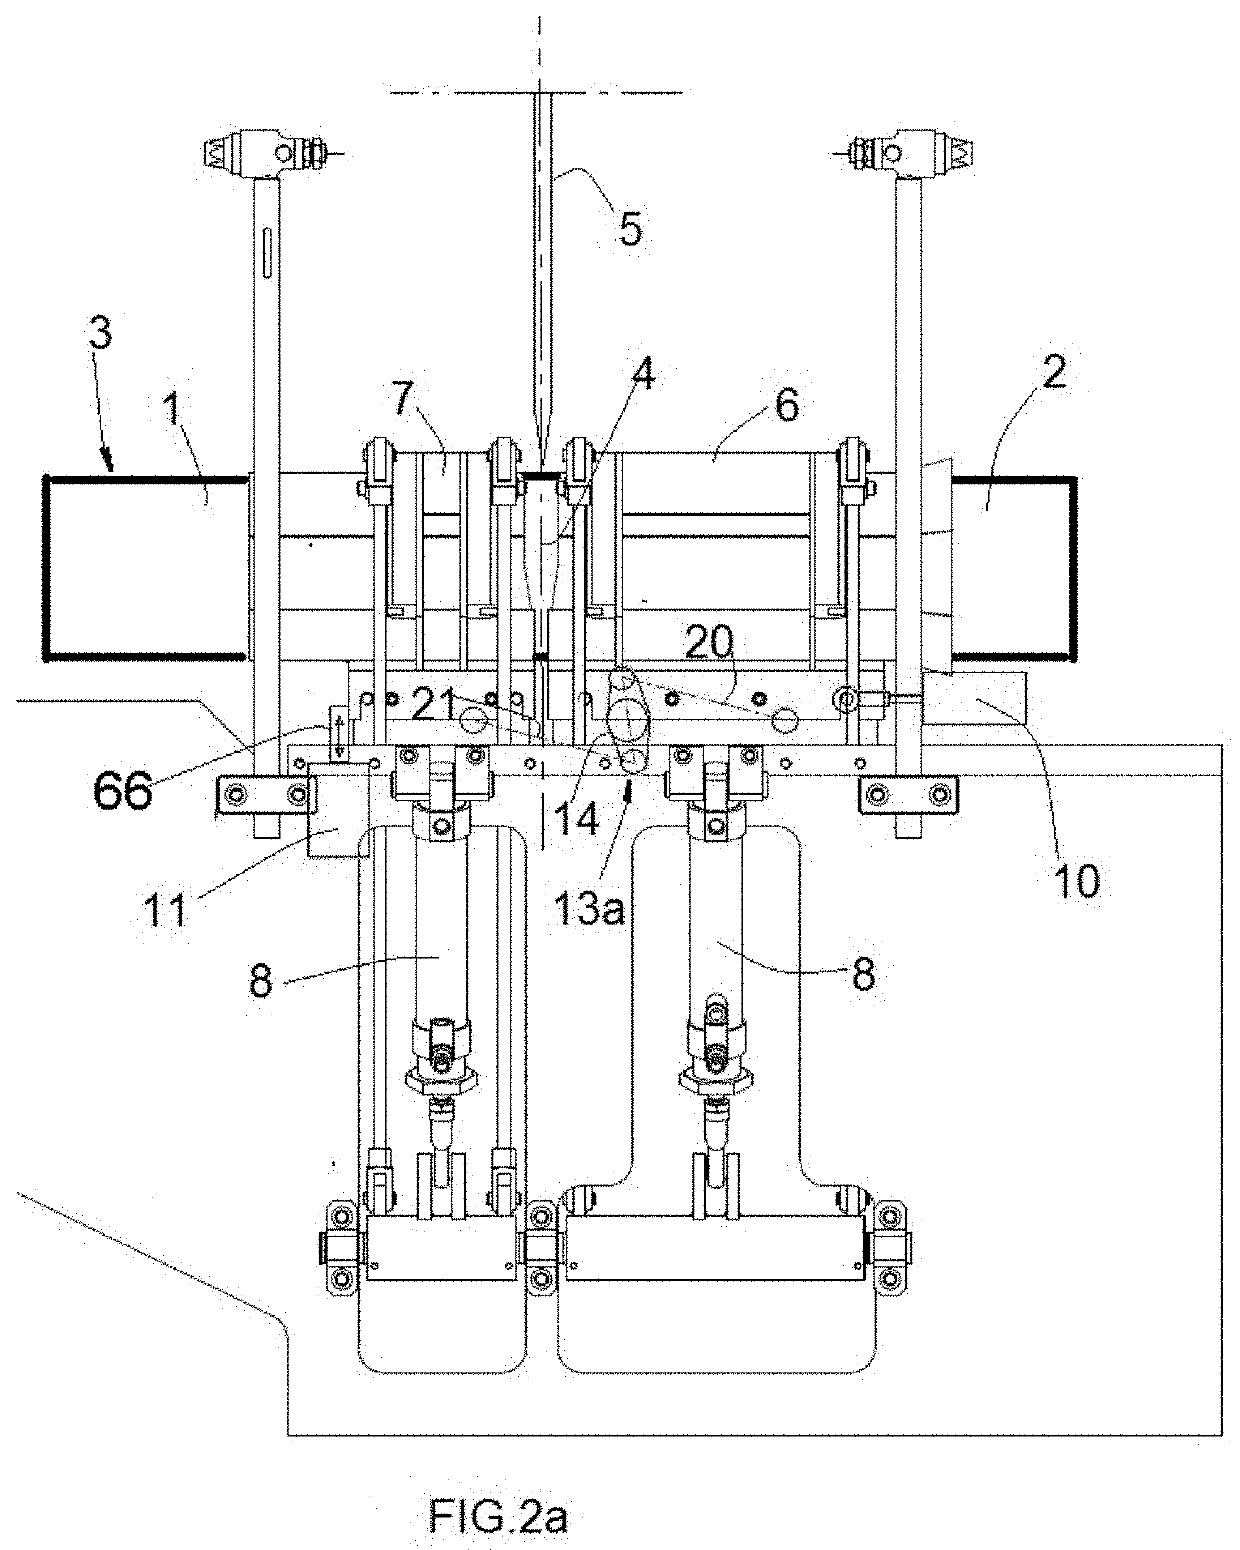 Device for clamping a roll of paper in a cutting machine